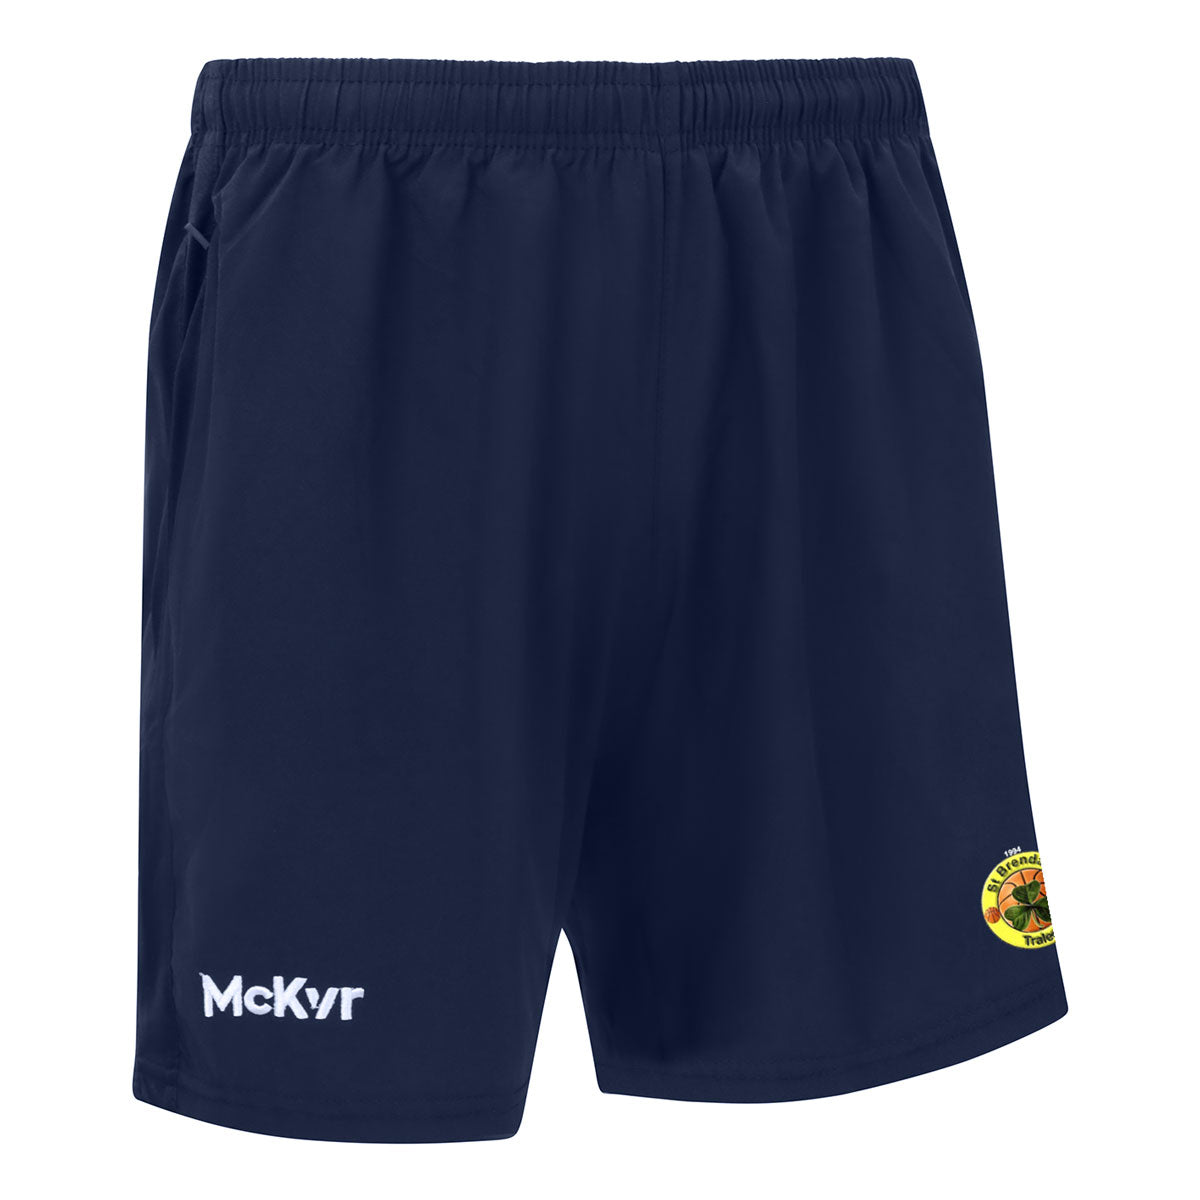 Mc Keever St Brendans Basketball Core 22 Leisure Shorts - Adult - Navy